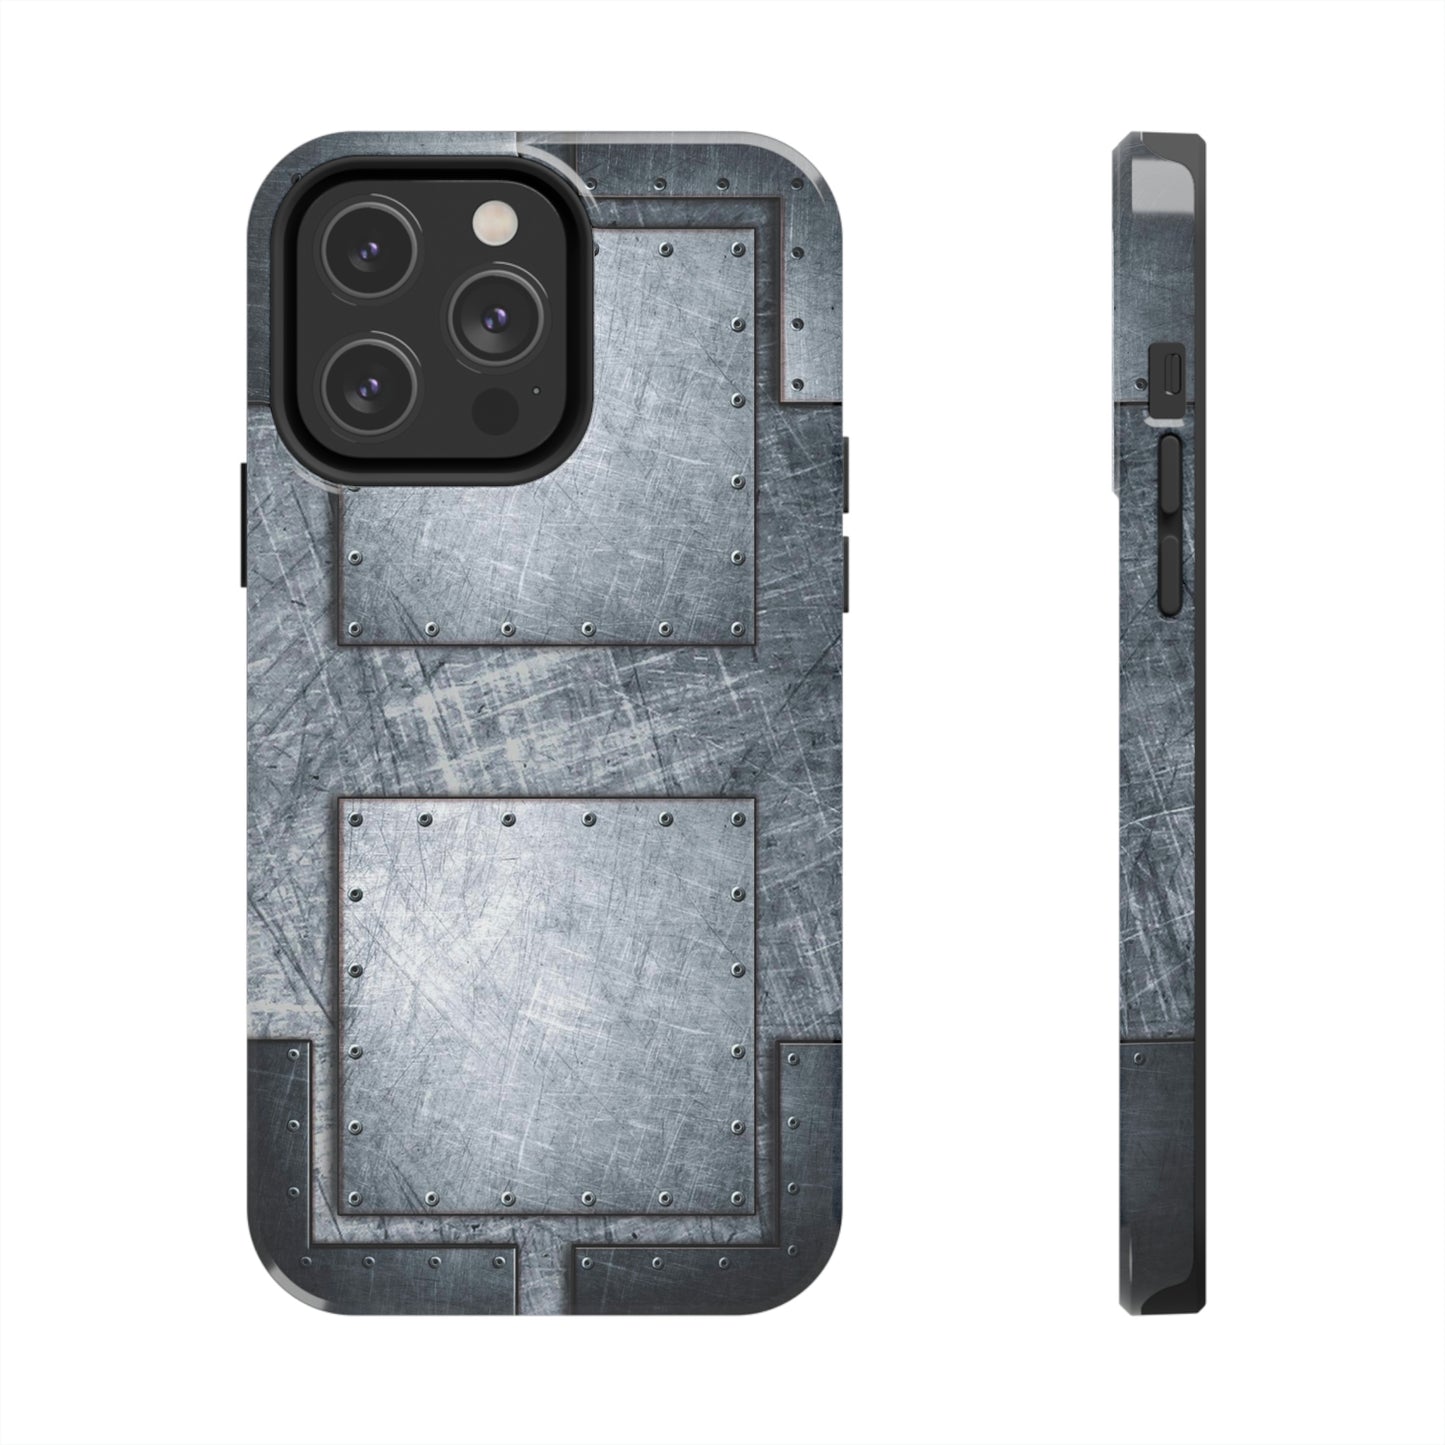 Steampunk Industrial Themed Tough Case for iPhone 14 - Distressed, Riveted Metal Plates Print Phone Case